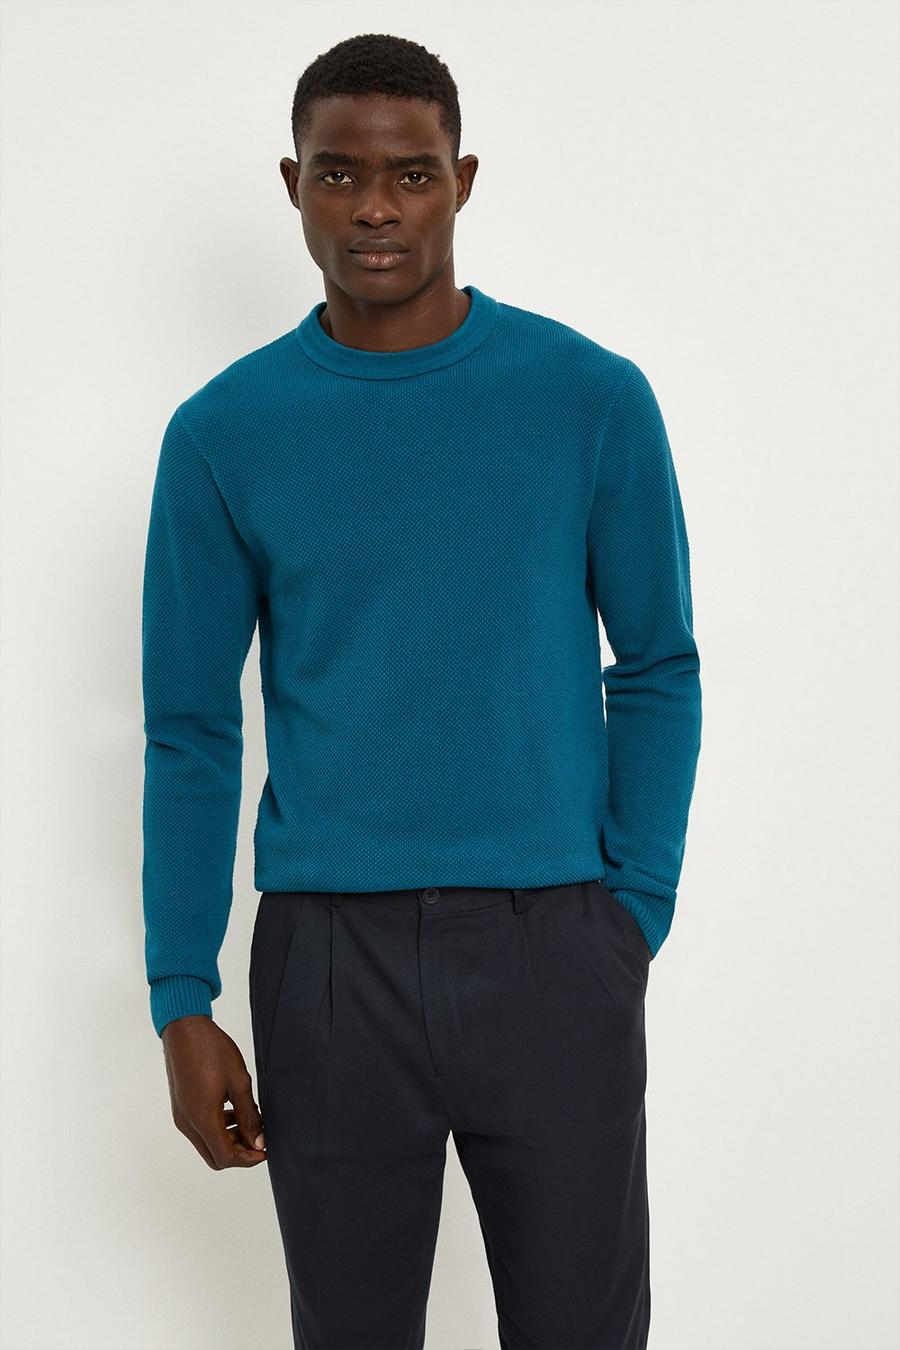 Slim Fit Long Sleeve Mossy Stitch Teal Crew